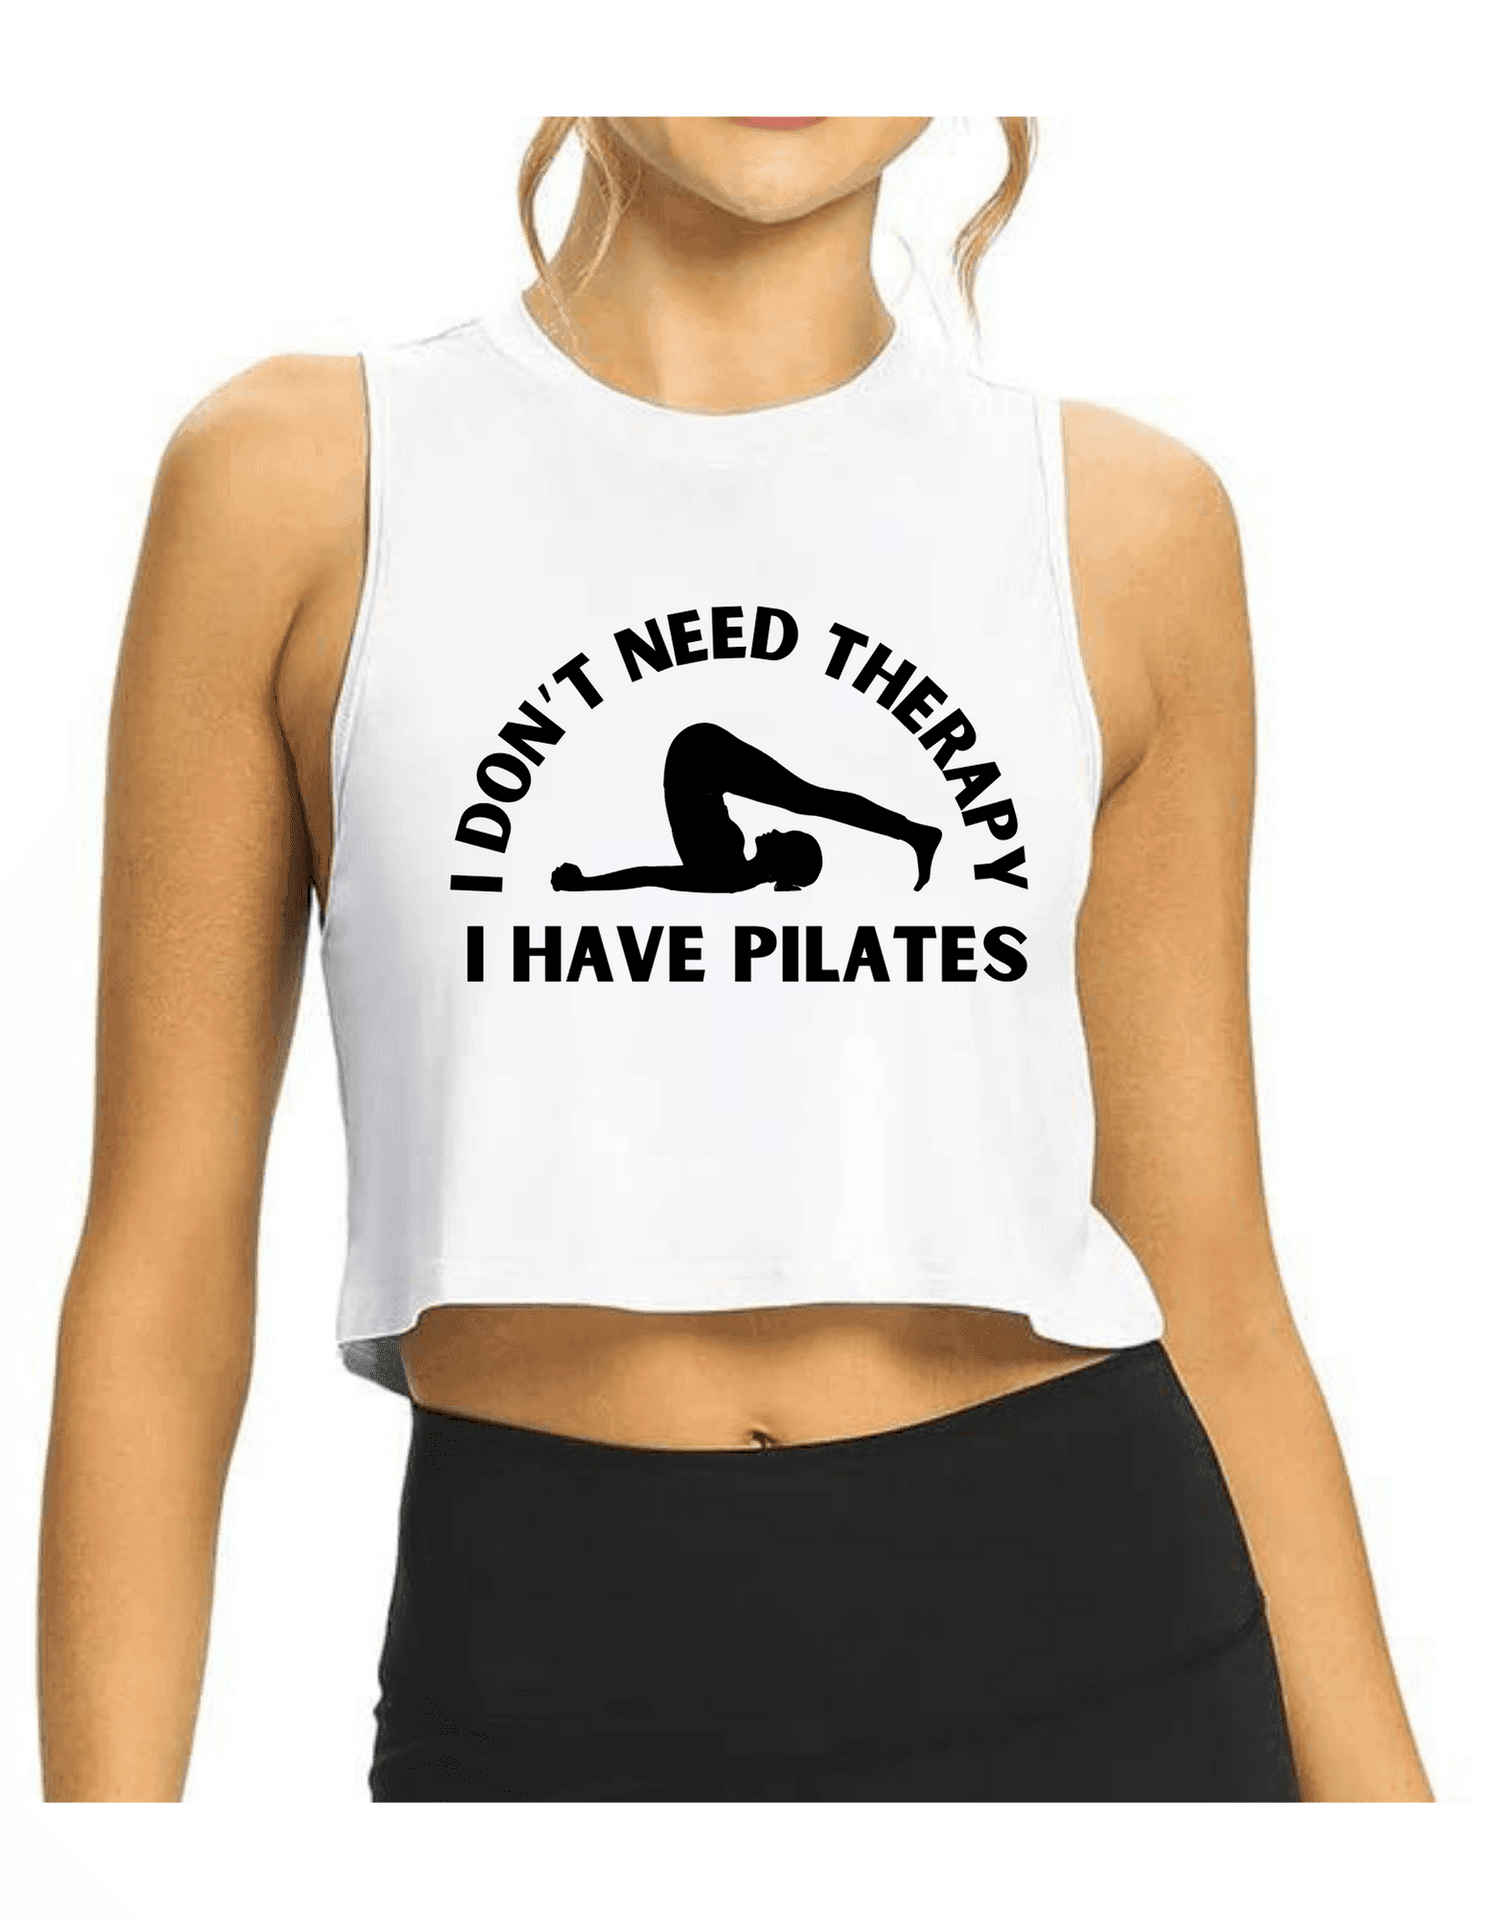 I dont need therapy, I have Pilates tank top